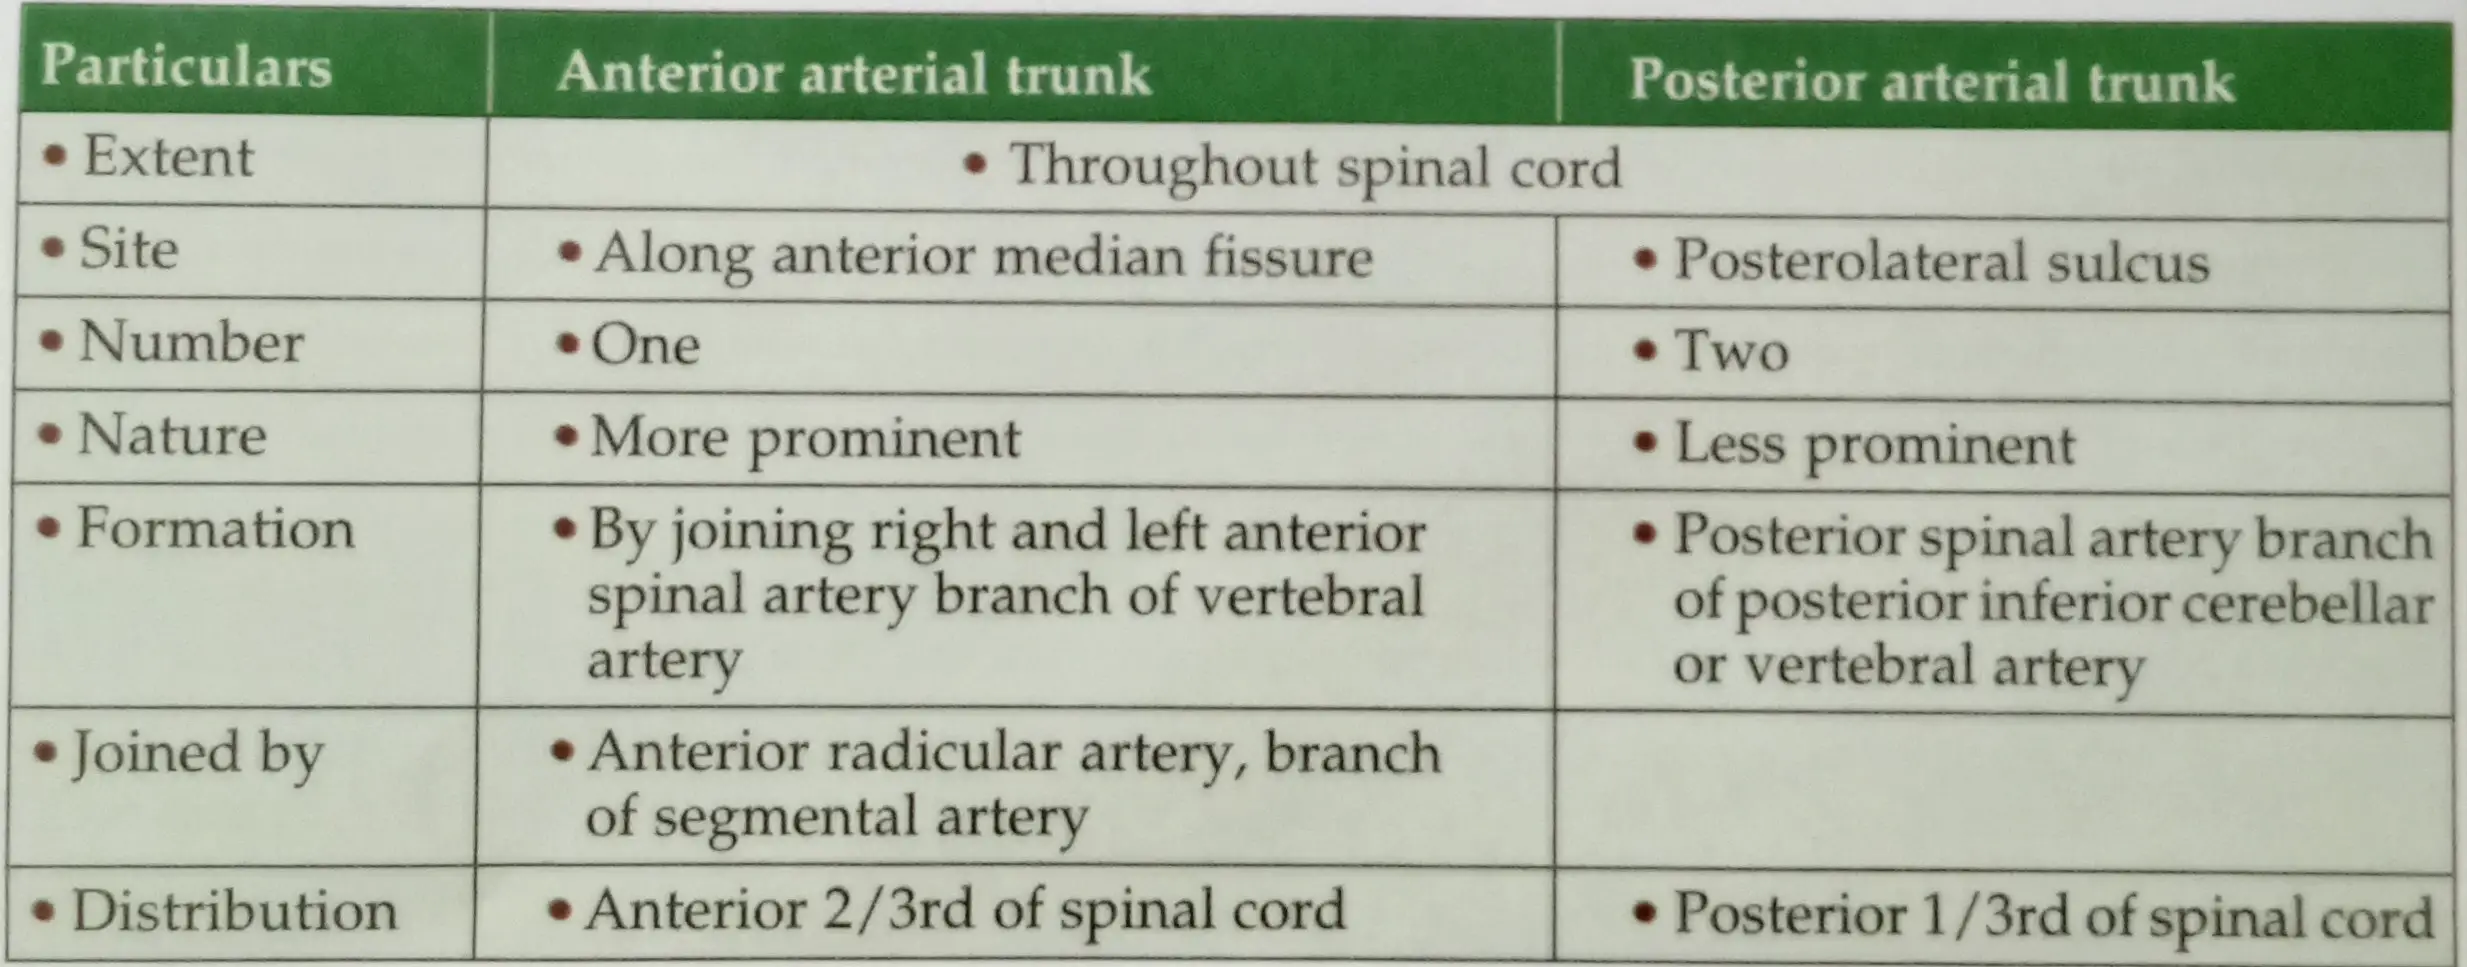 Details About Anterior And Posterior Arterial Trunks